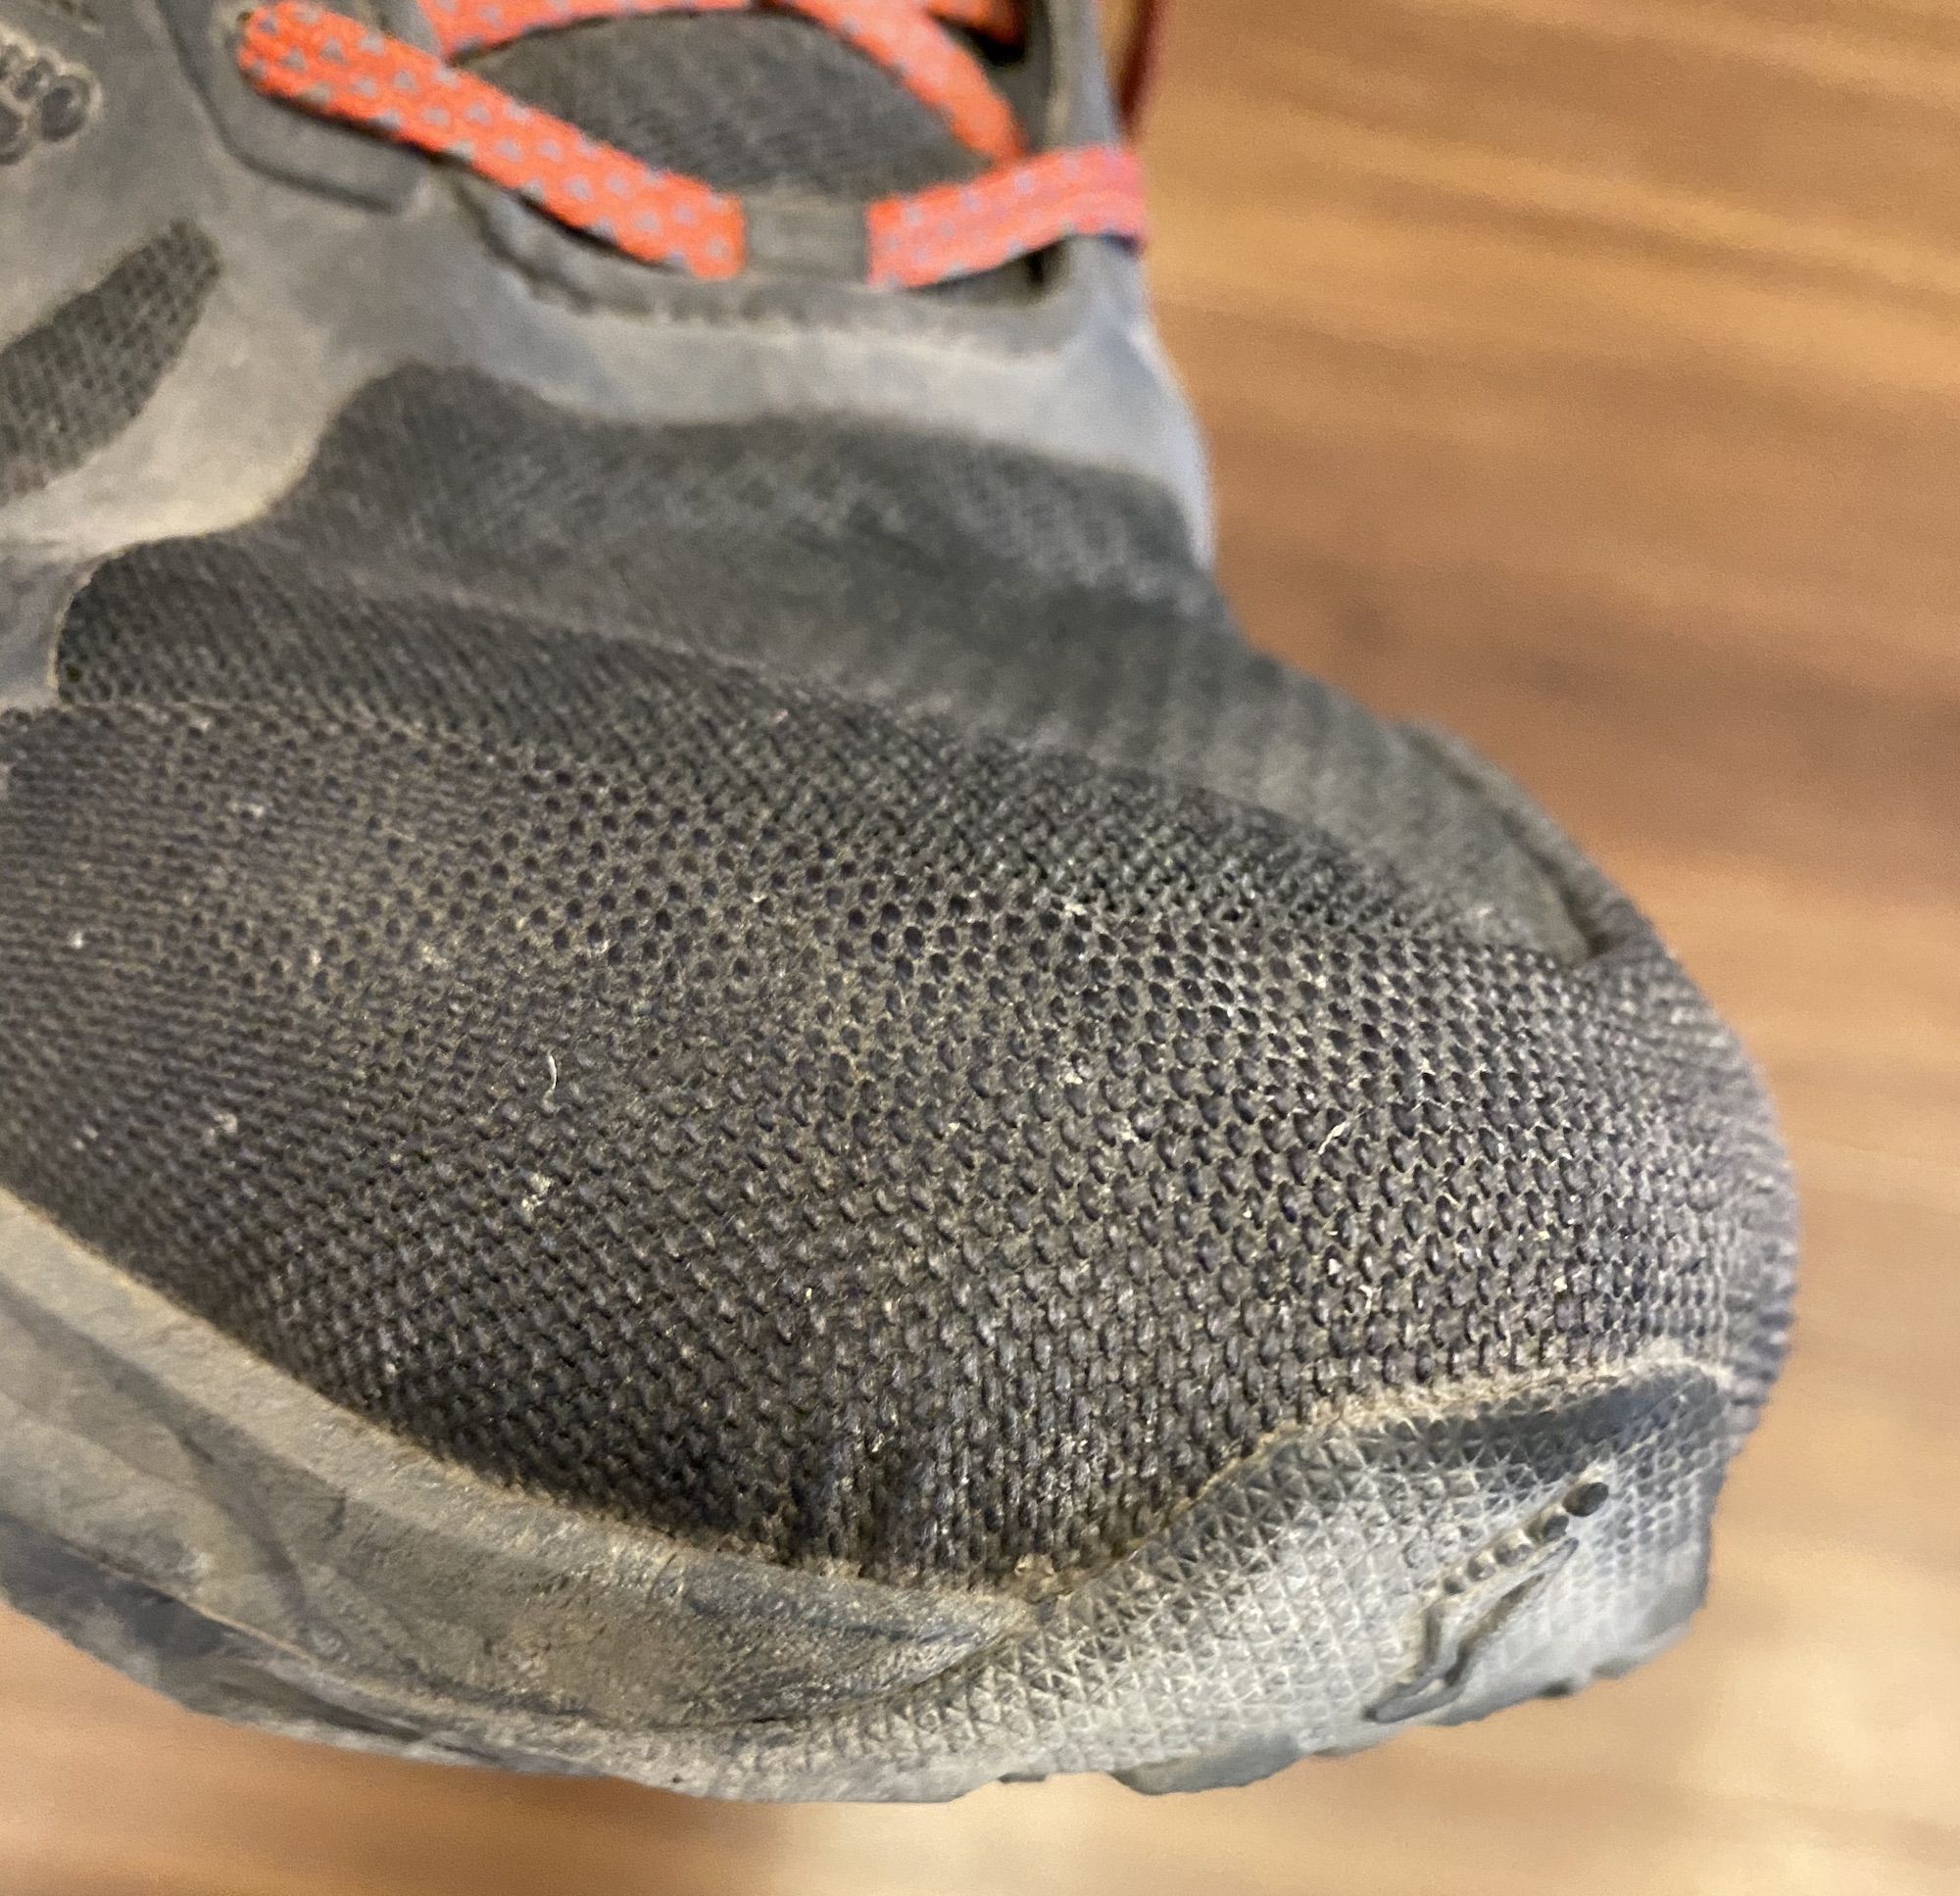 The Inov-8 kevlar-reinforced toe guard is still intact after 100 miles